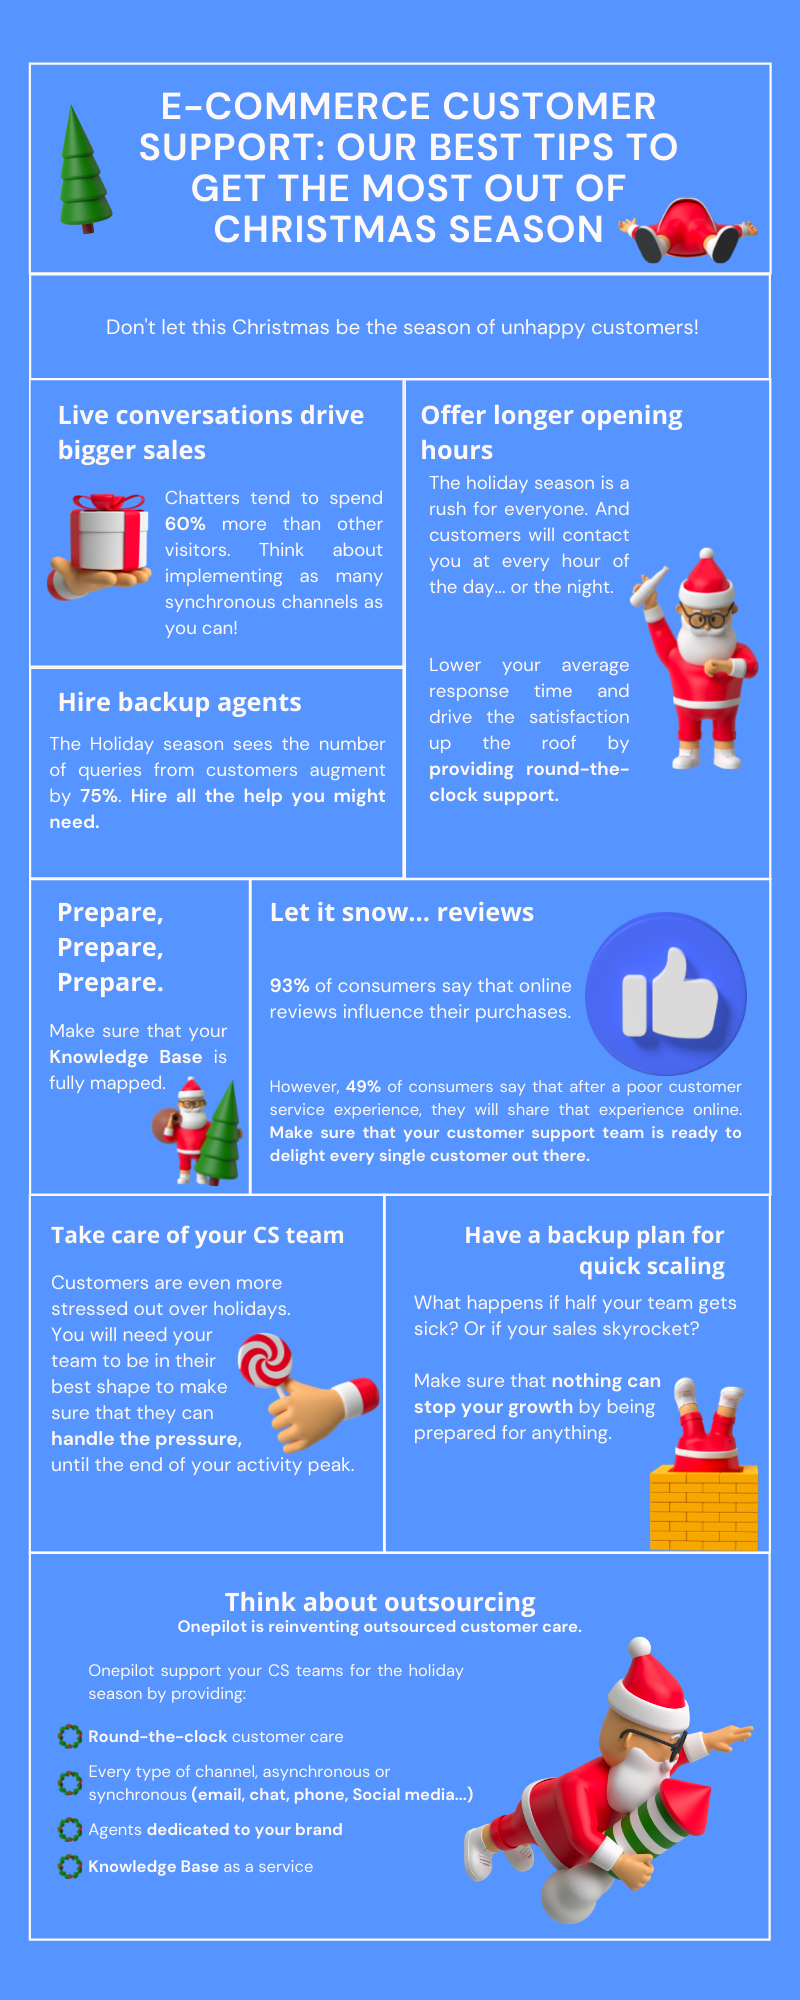 E-COMMERCE CUSTOMER SUPPORT OUR BEST TIPS TO SURVIVE CHISTMAS SEASON (1).png